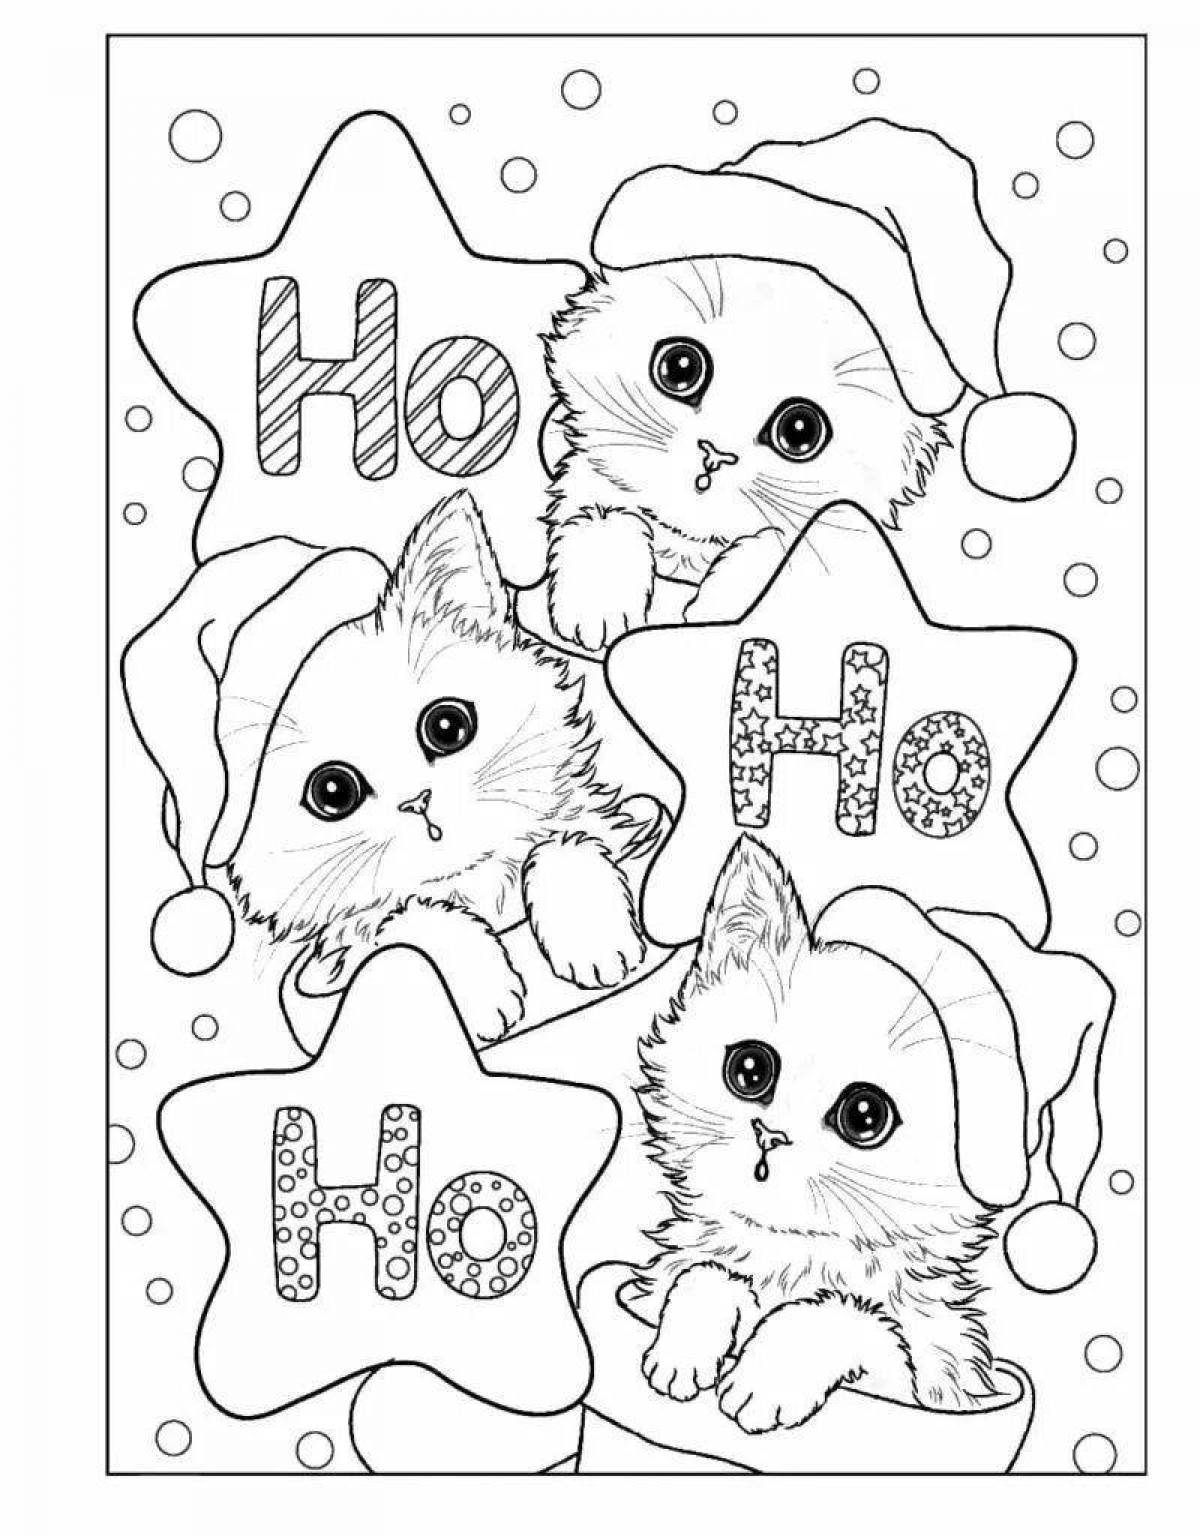 Animated cat year coloring book